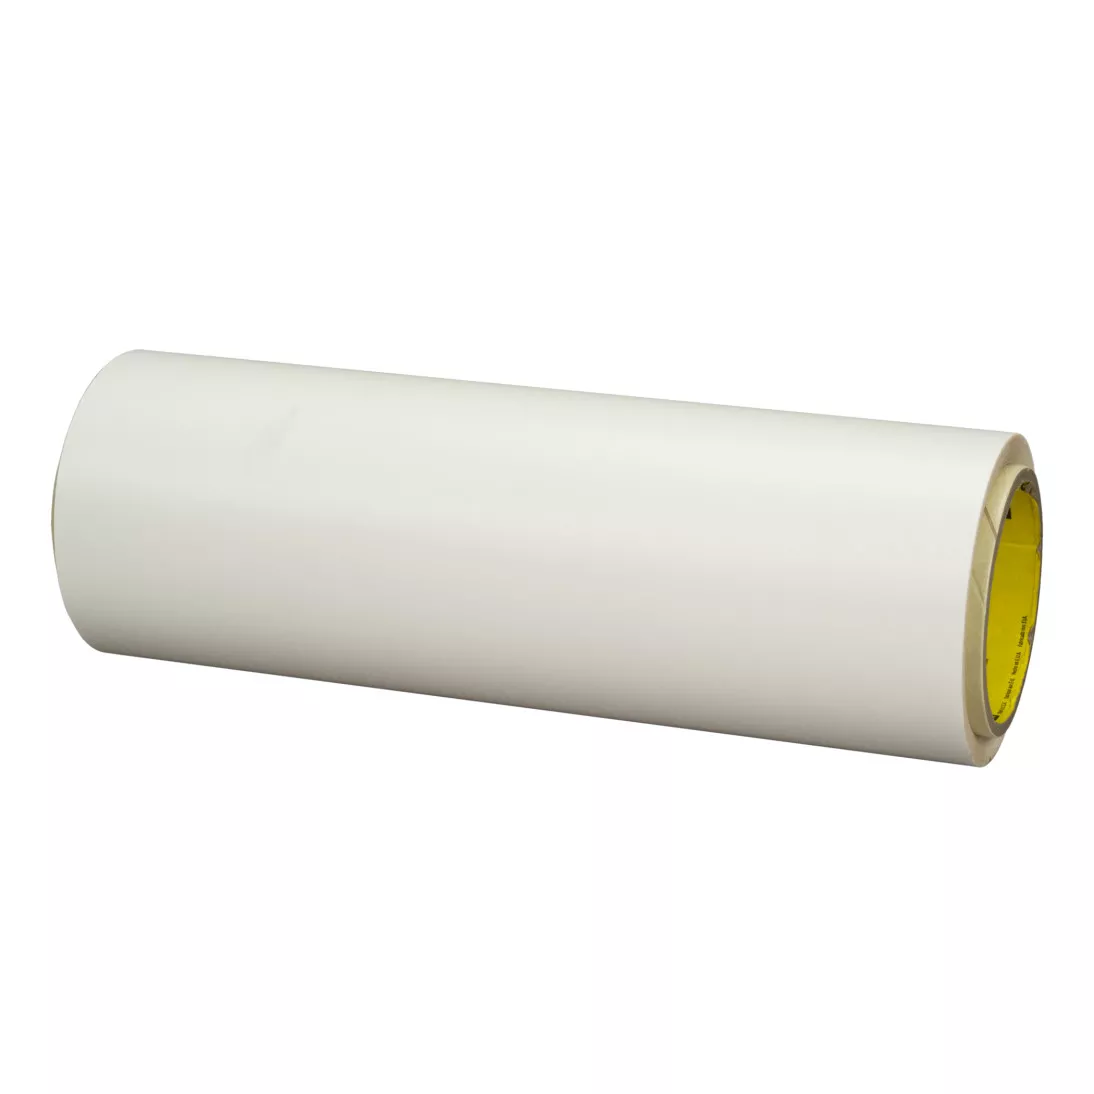 3M™ Adhesive Transfer Tape 9775WL, Clear, 54 in x 180 yd, 5 mil, 1 roll
per case